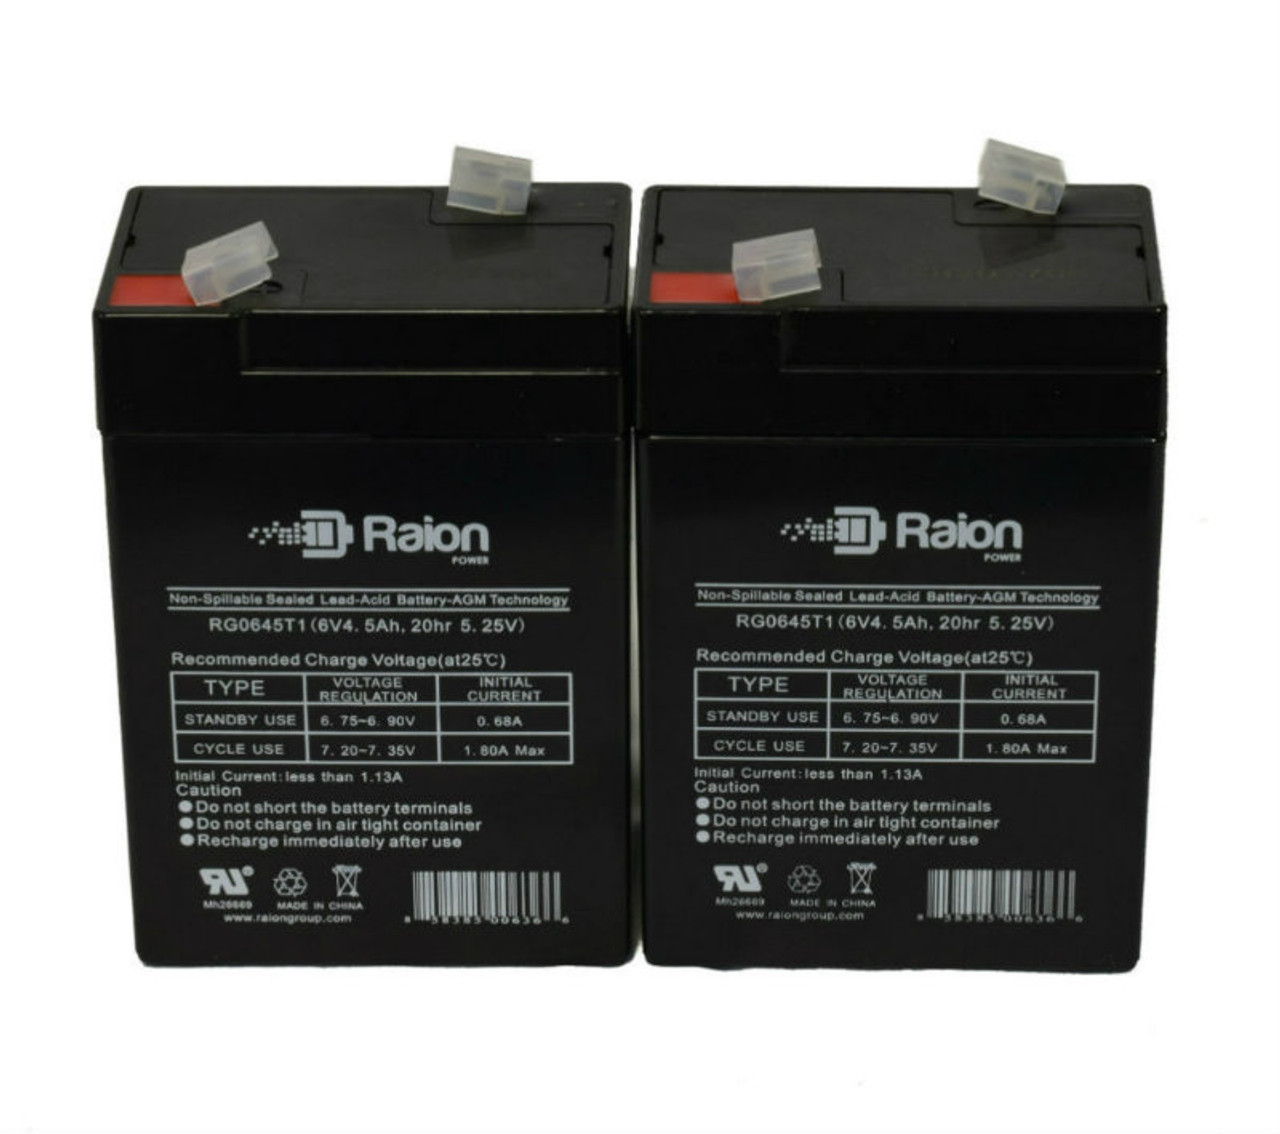 Raion Power 6 Volt 4.5Ah RG0645T1 Replacement Battery for Palma PM4A-6 - 2 Pack